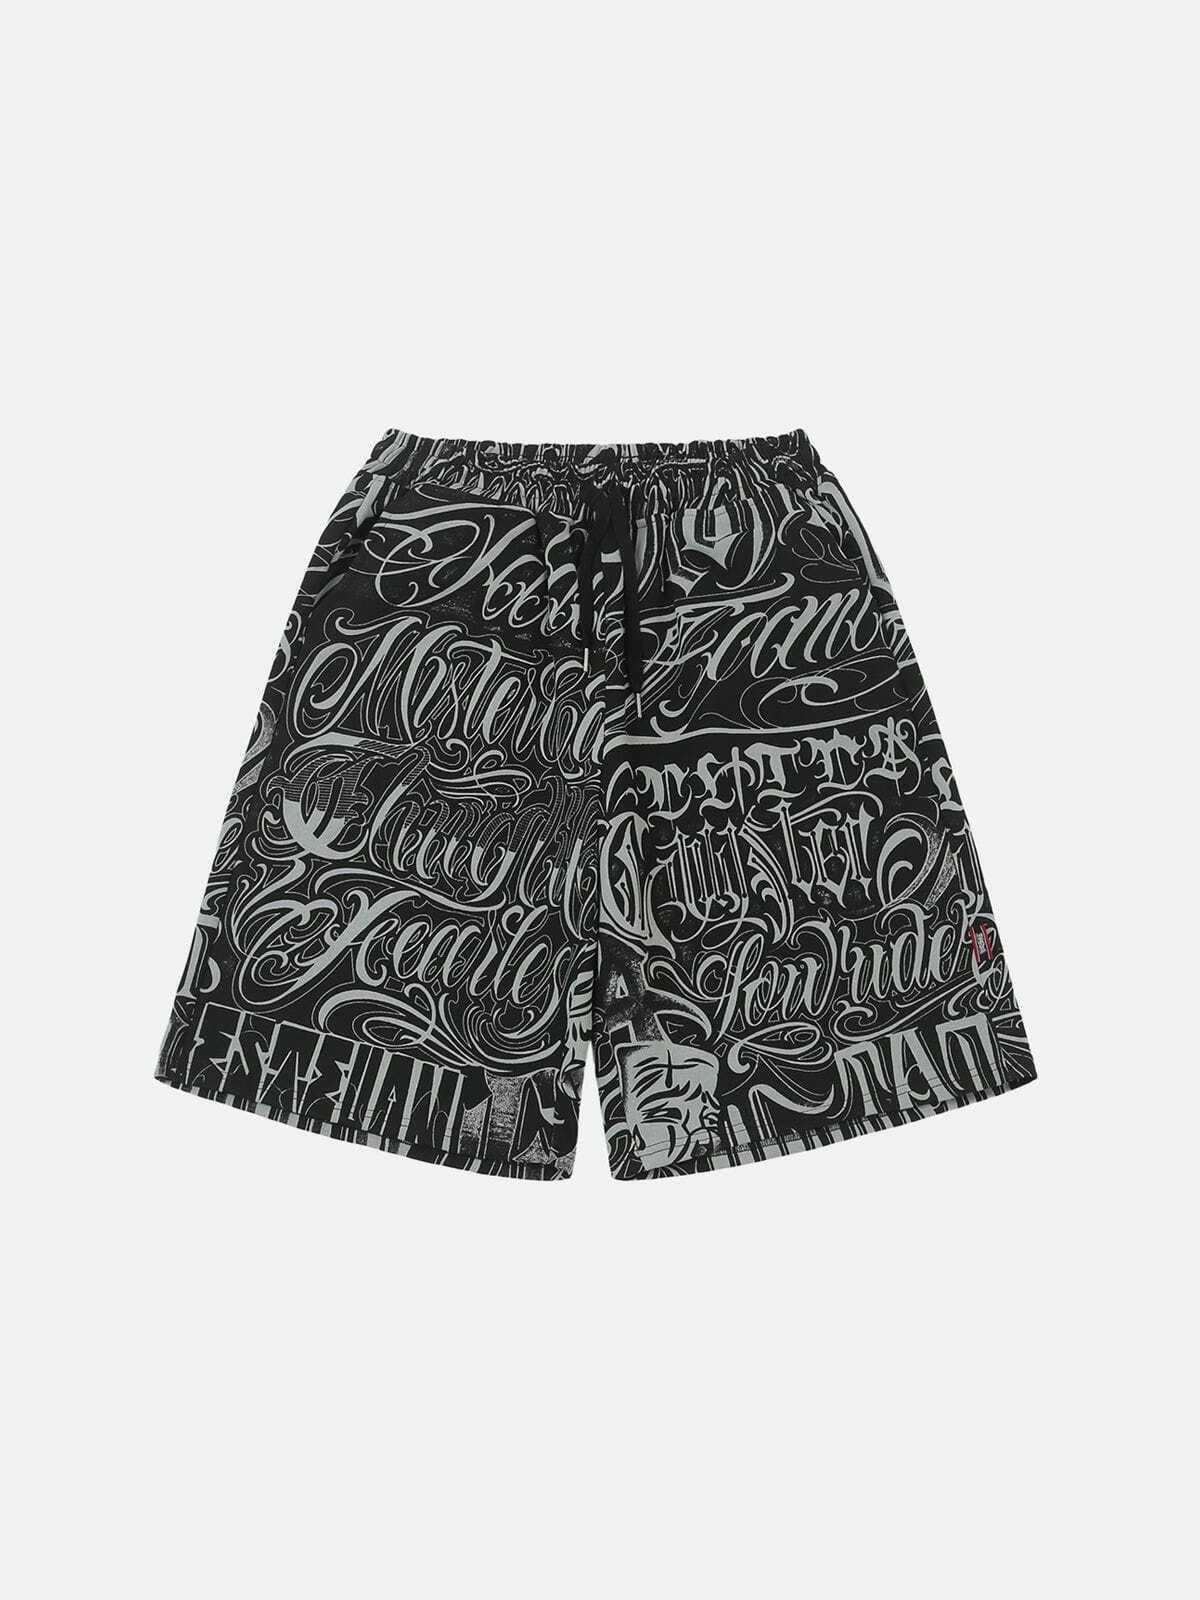 gothic letter print shorts edgy & trending 4601